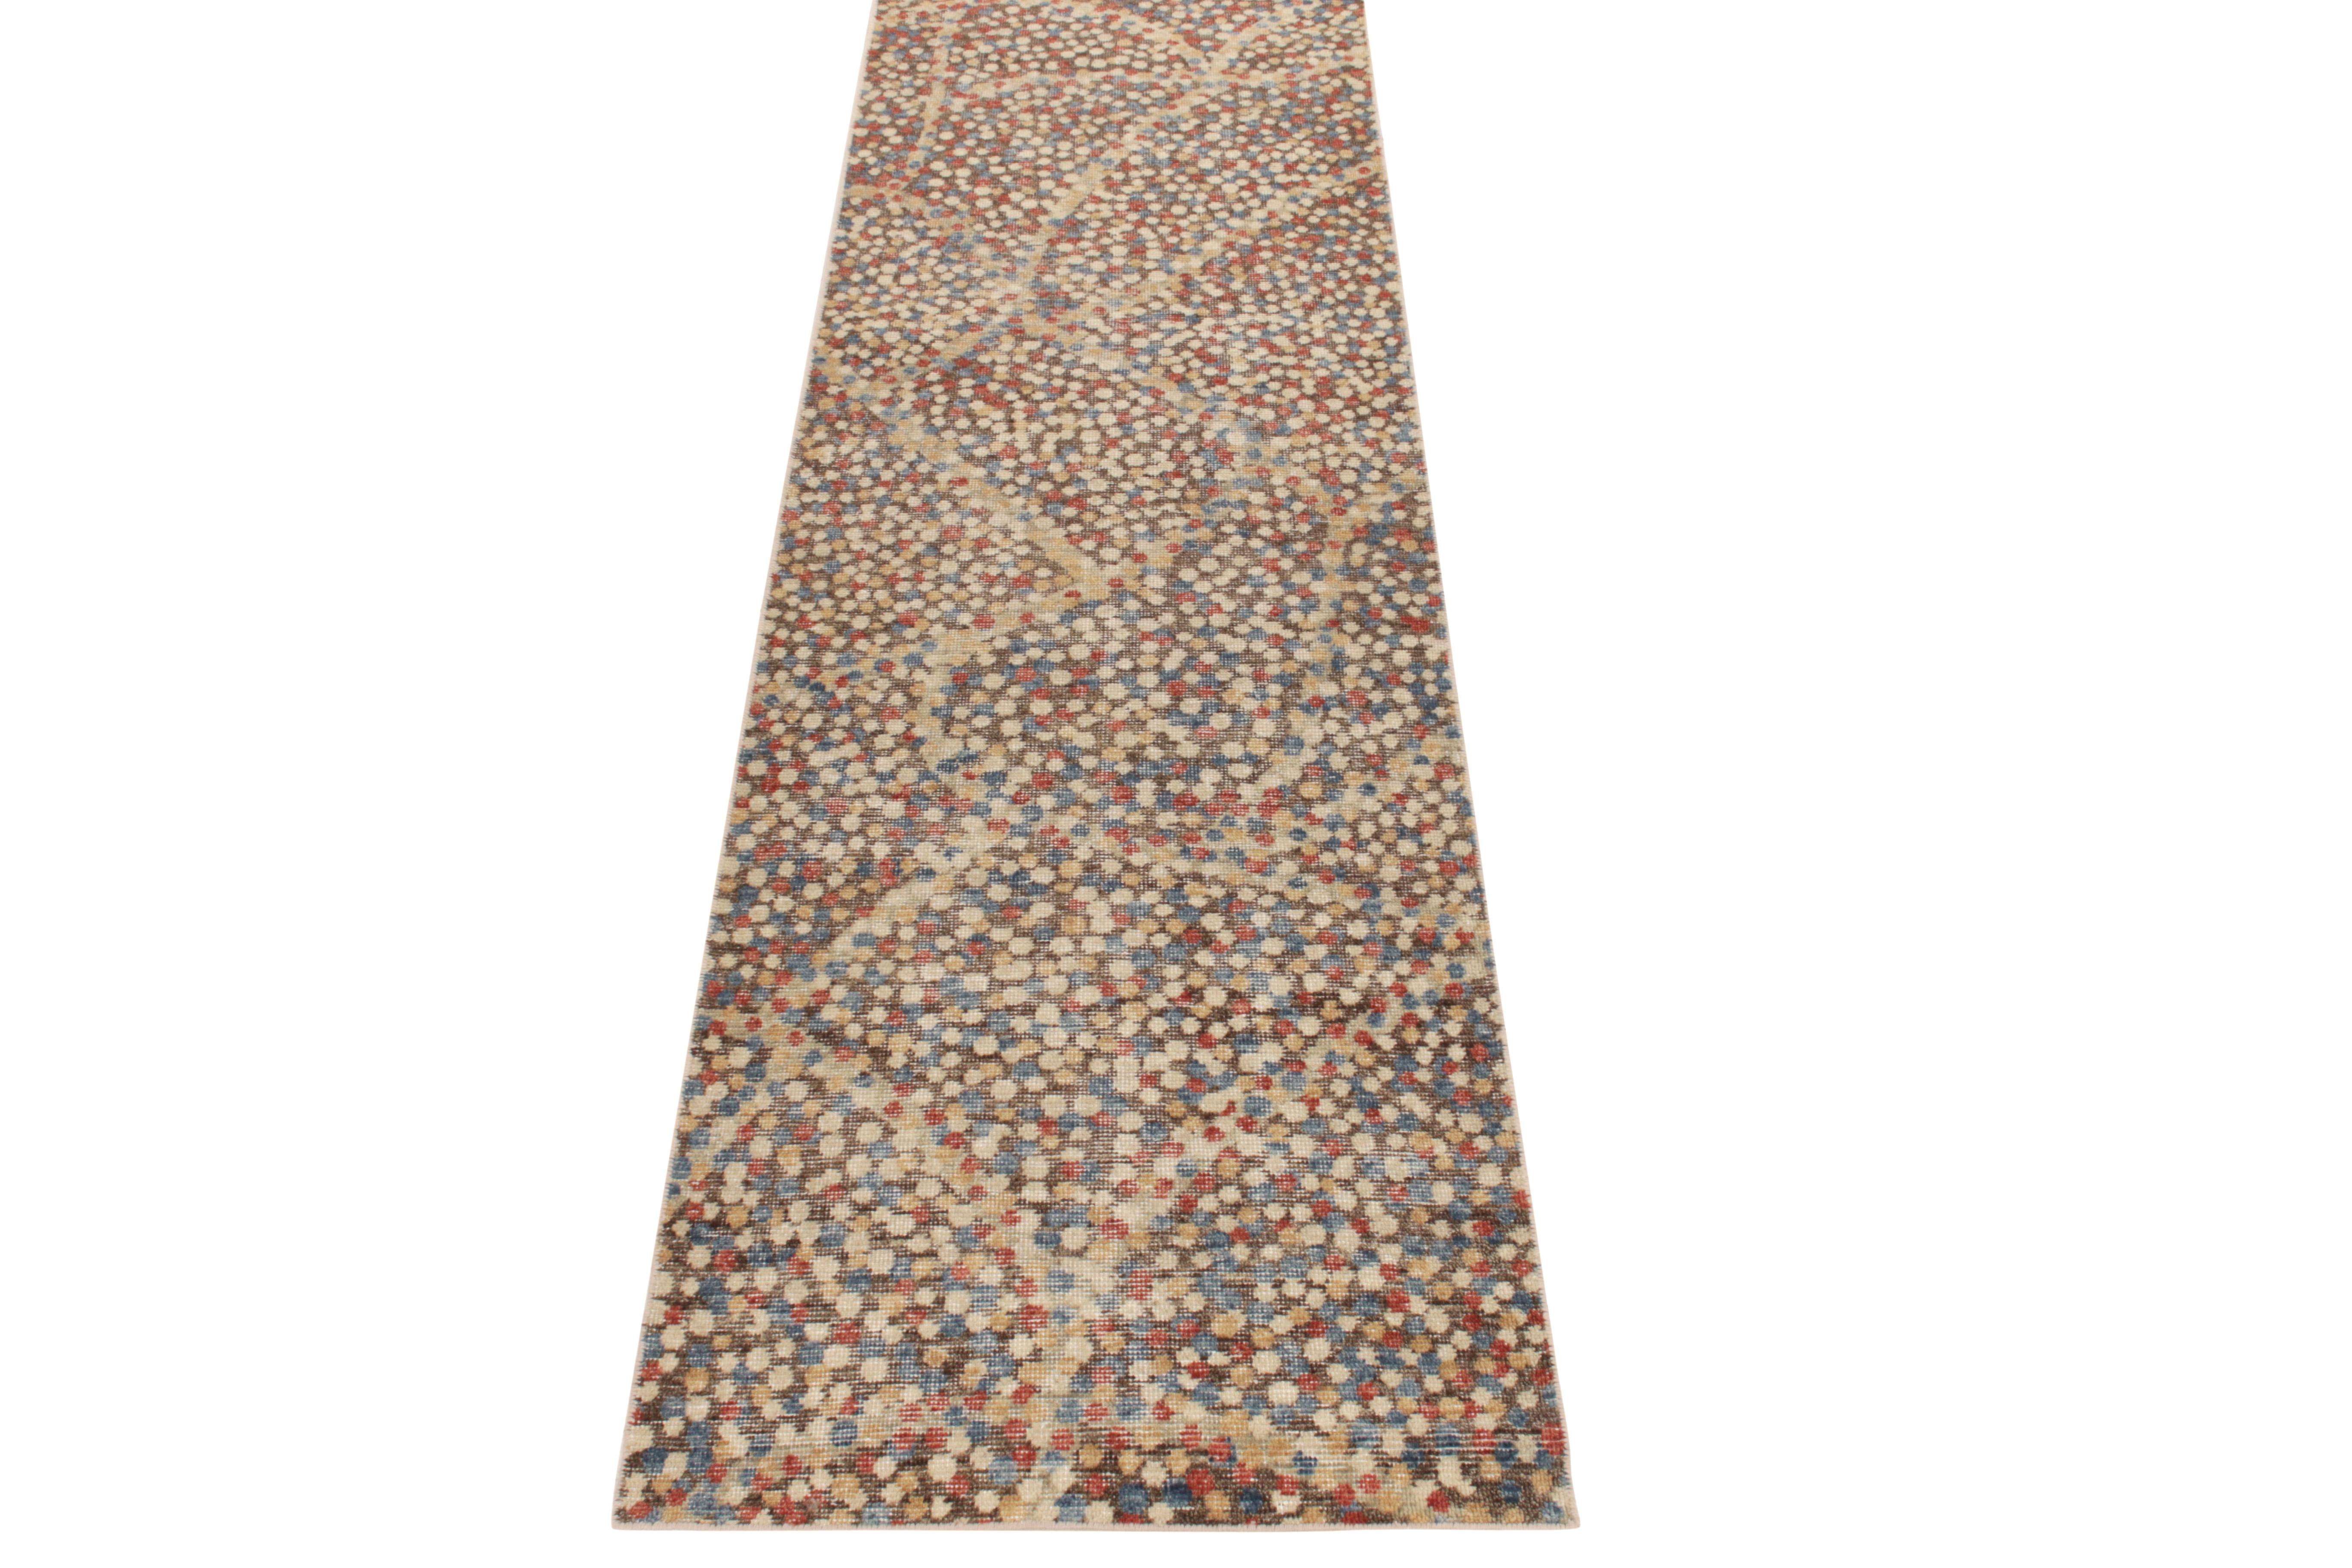 From Rug & Kilim’s Dots Line in their acclaimed Homage Collection, a 3x10 distressed style custom runner design featuring a riot of color in a mature tones of sky blue, crimson red & beige-brown in their abstract brilliance. A hand-knotted piece